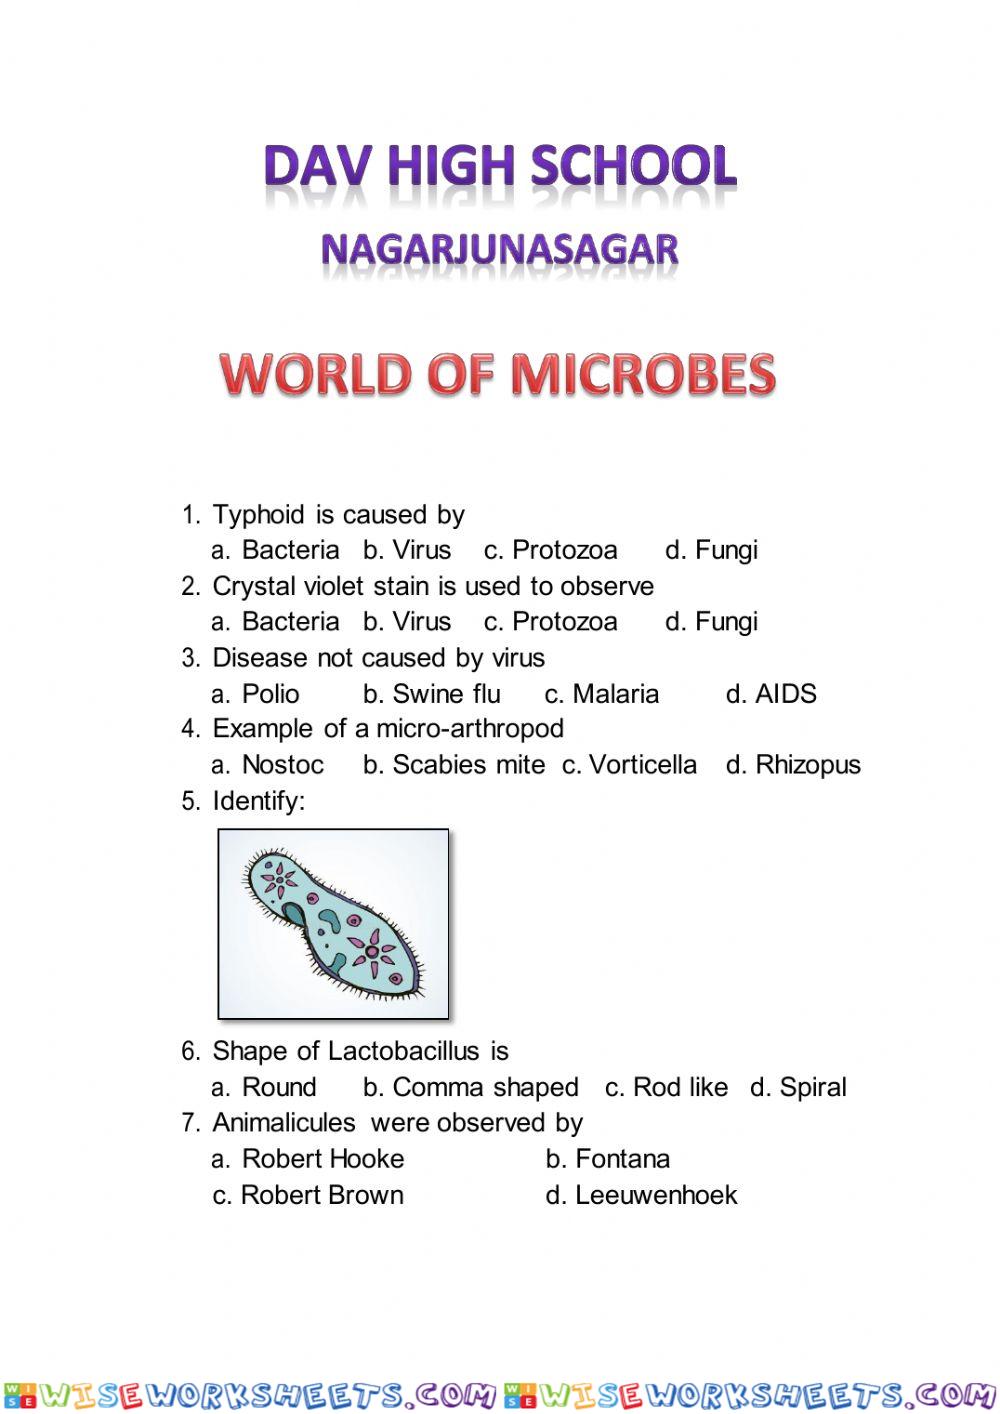 World of microbes